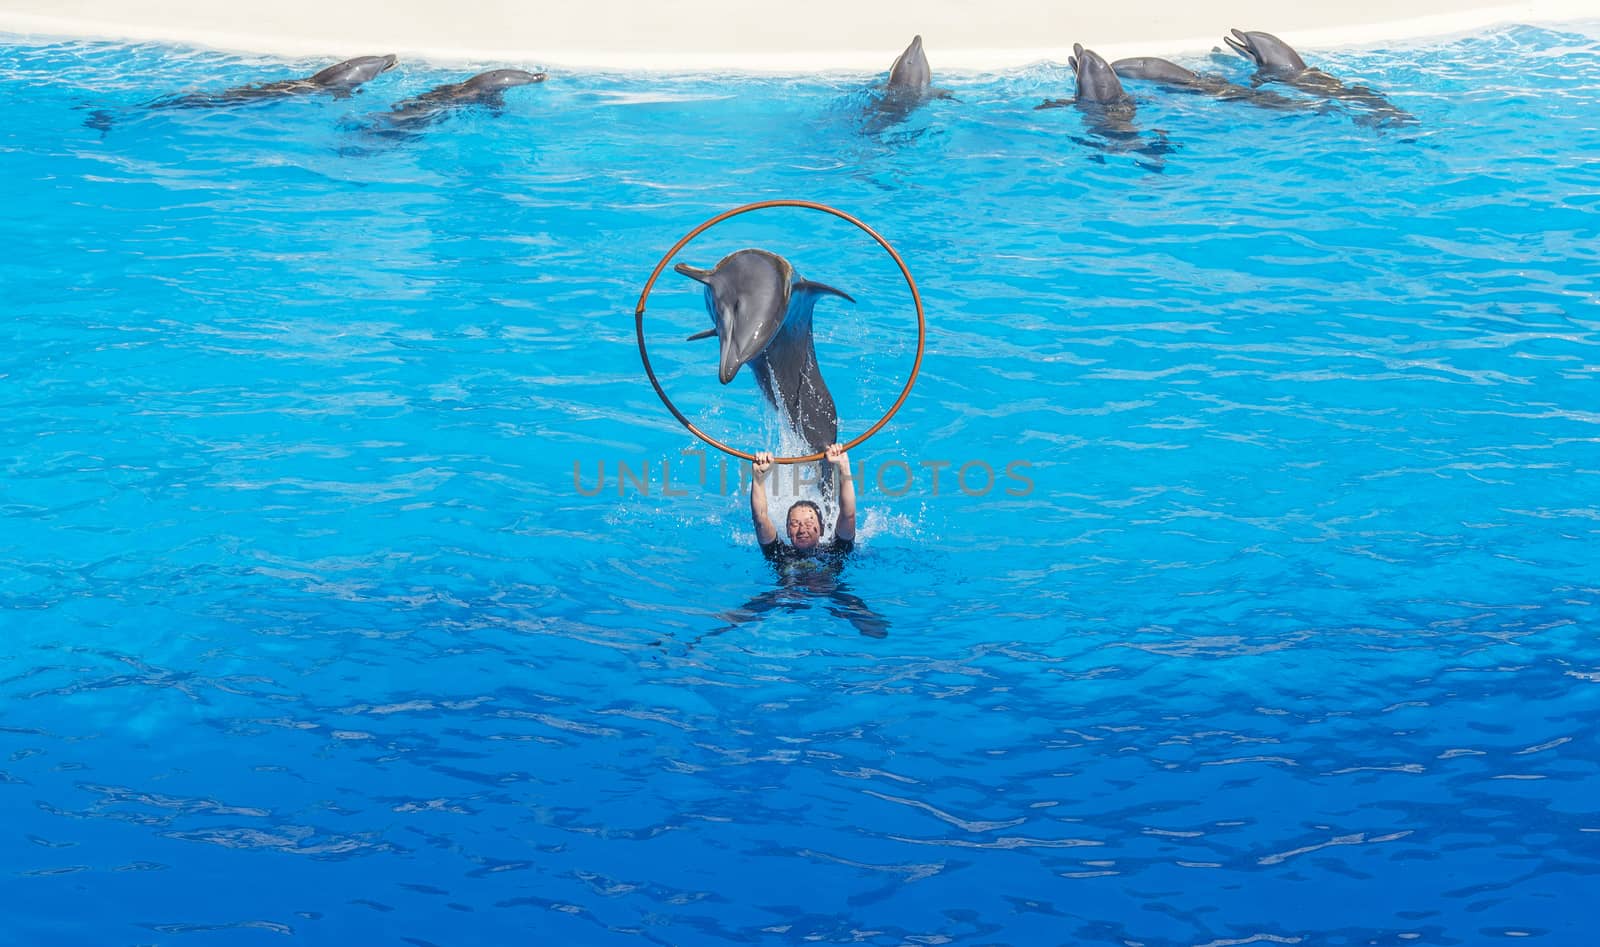 Dolphin show in the Loro Parque (Loro Parque), a dolphin jumping into the hoop in the hands of the trainer, 13.09.2016, (Tenerife, Spain).